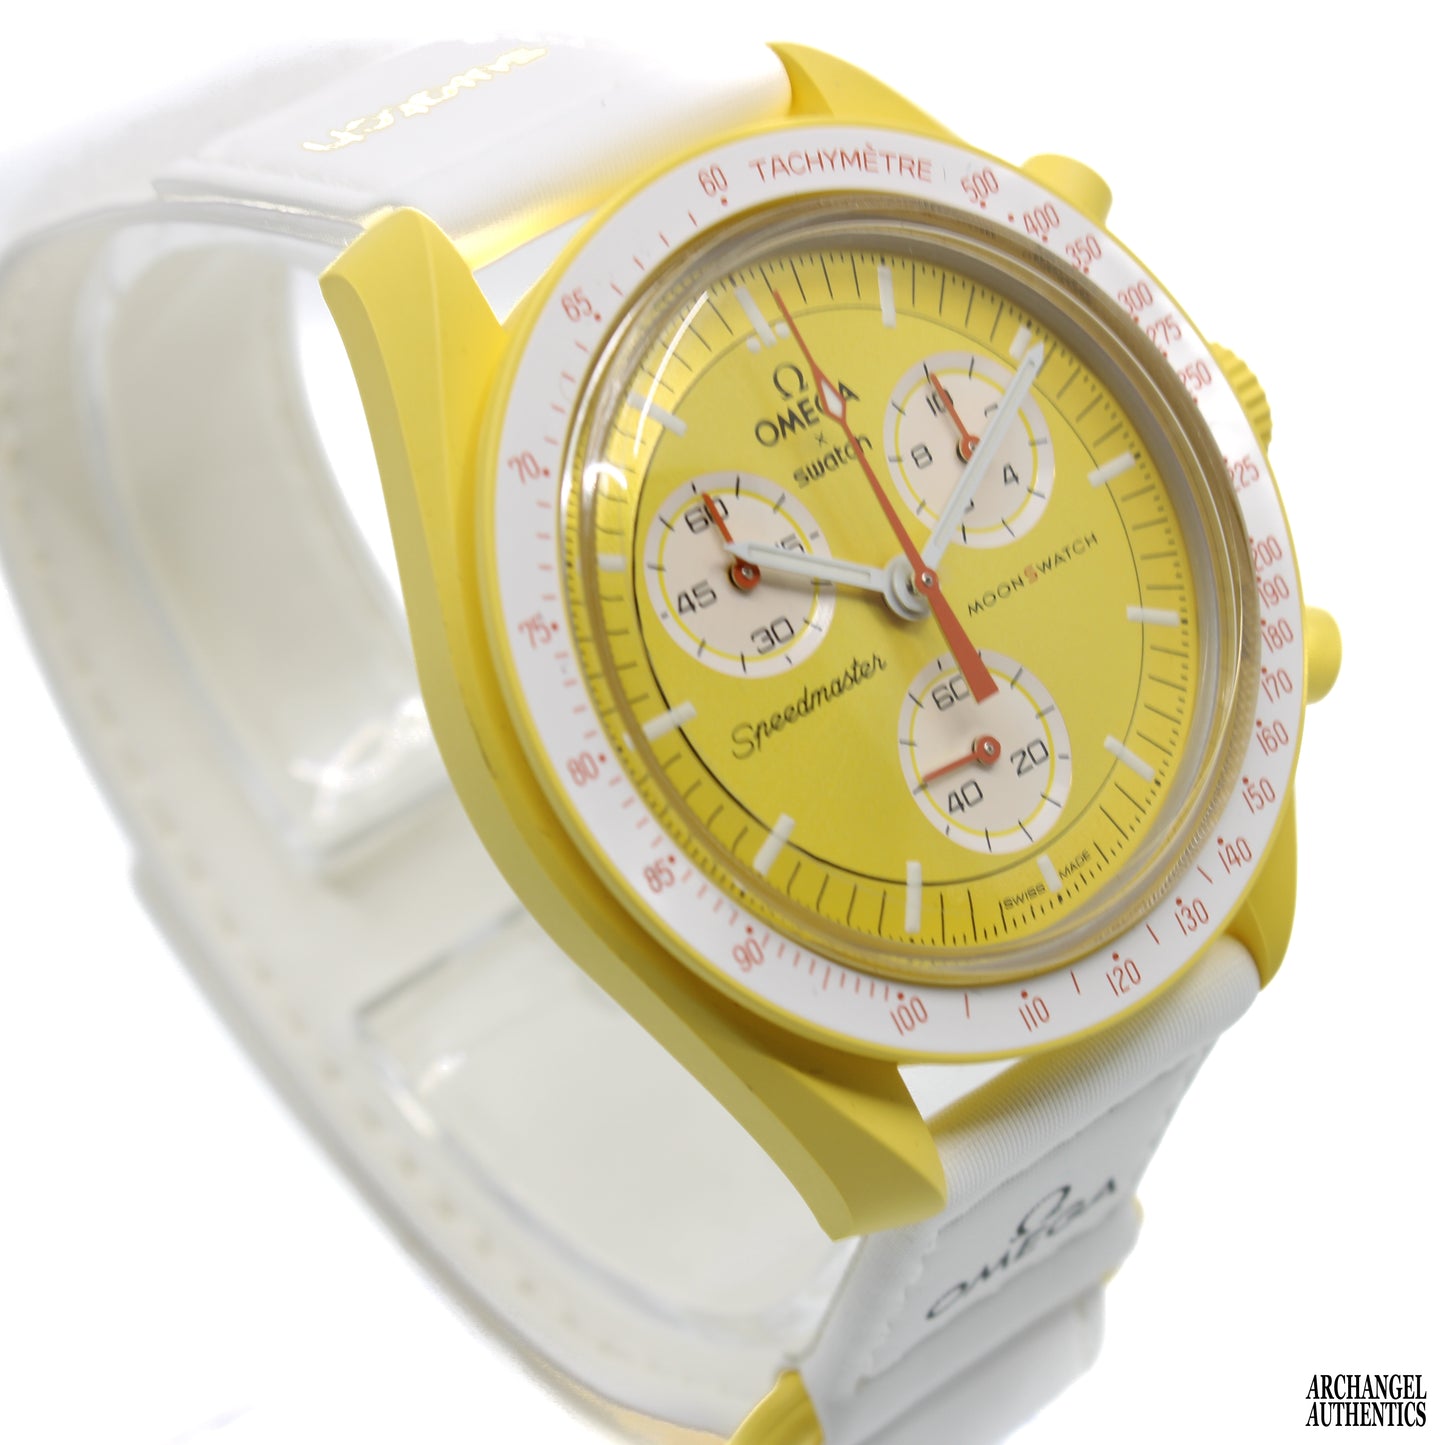 Swatch x Omega MoonSwatch Mission to The Sun